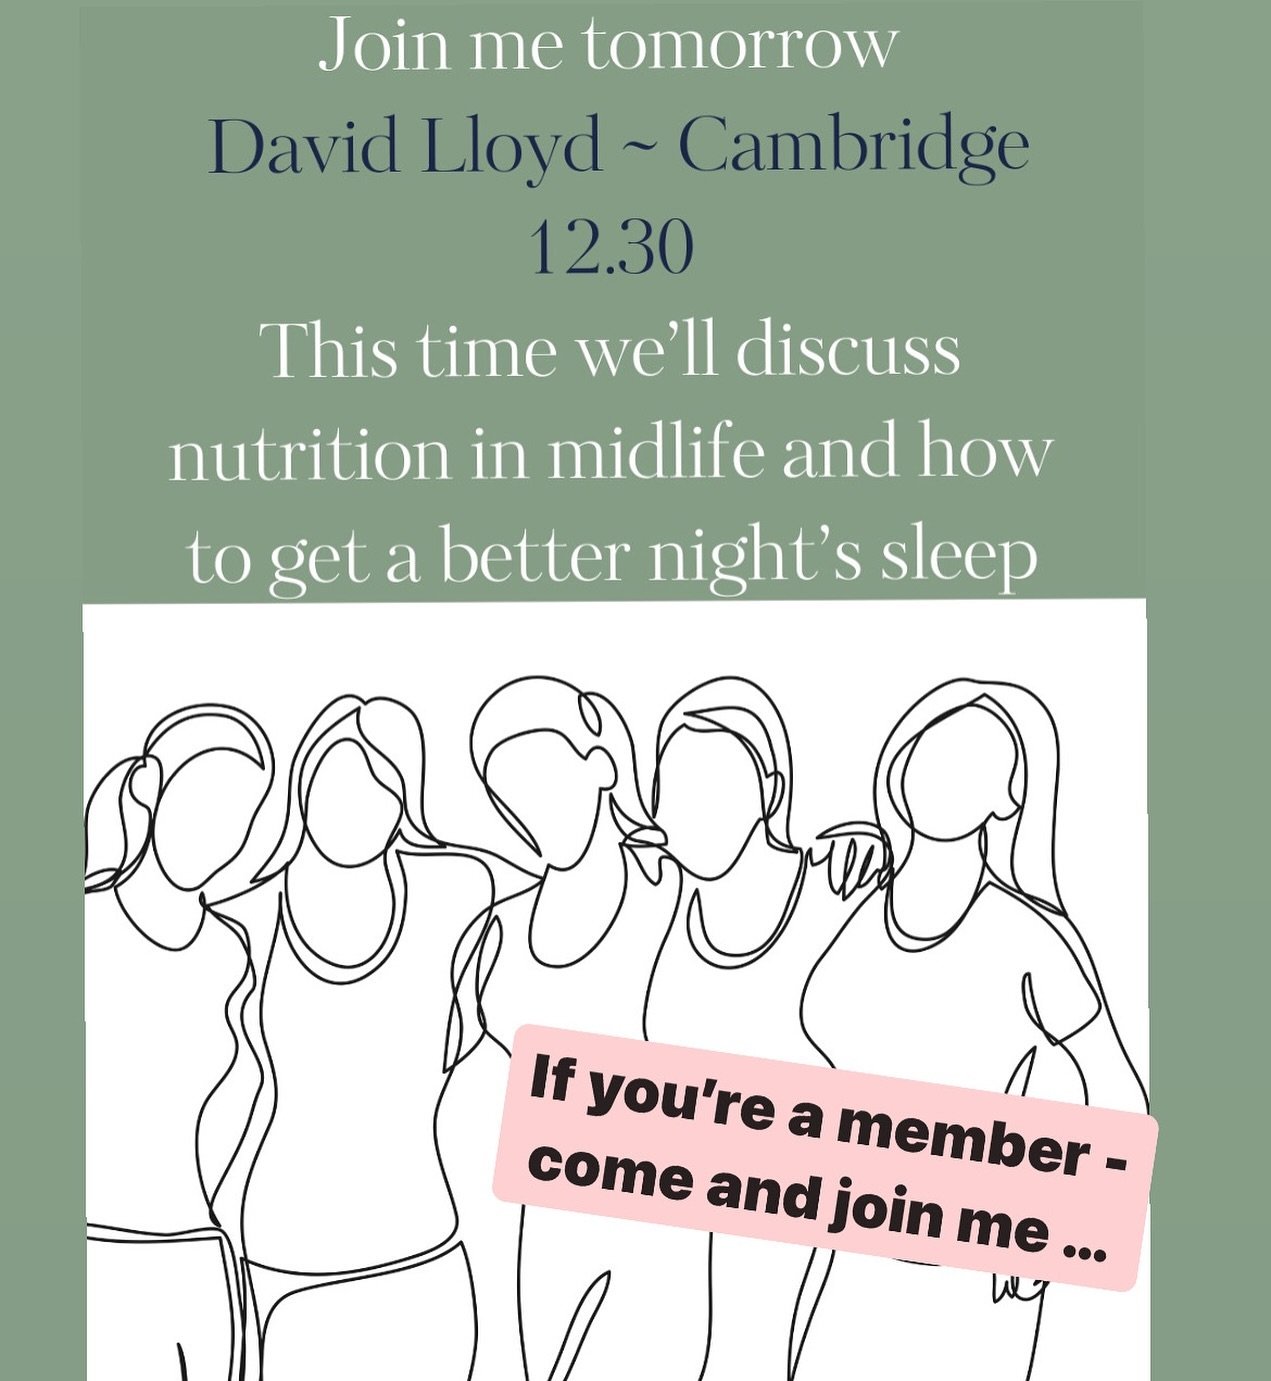 I&rsquo;m giving a talk at David Lloyd - Cambridge tomorrow 

Thursday 25th April 

1230 ~ 1.30 pm

If you&rsquo;re a member do come along 

I&rsquo;ll be discussing the most important nutrition hacks for midlife women and this month I&rsquo;ll also 